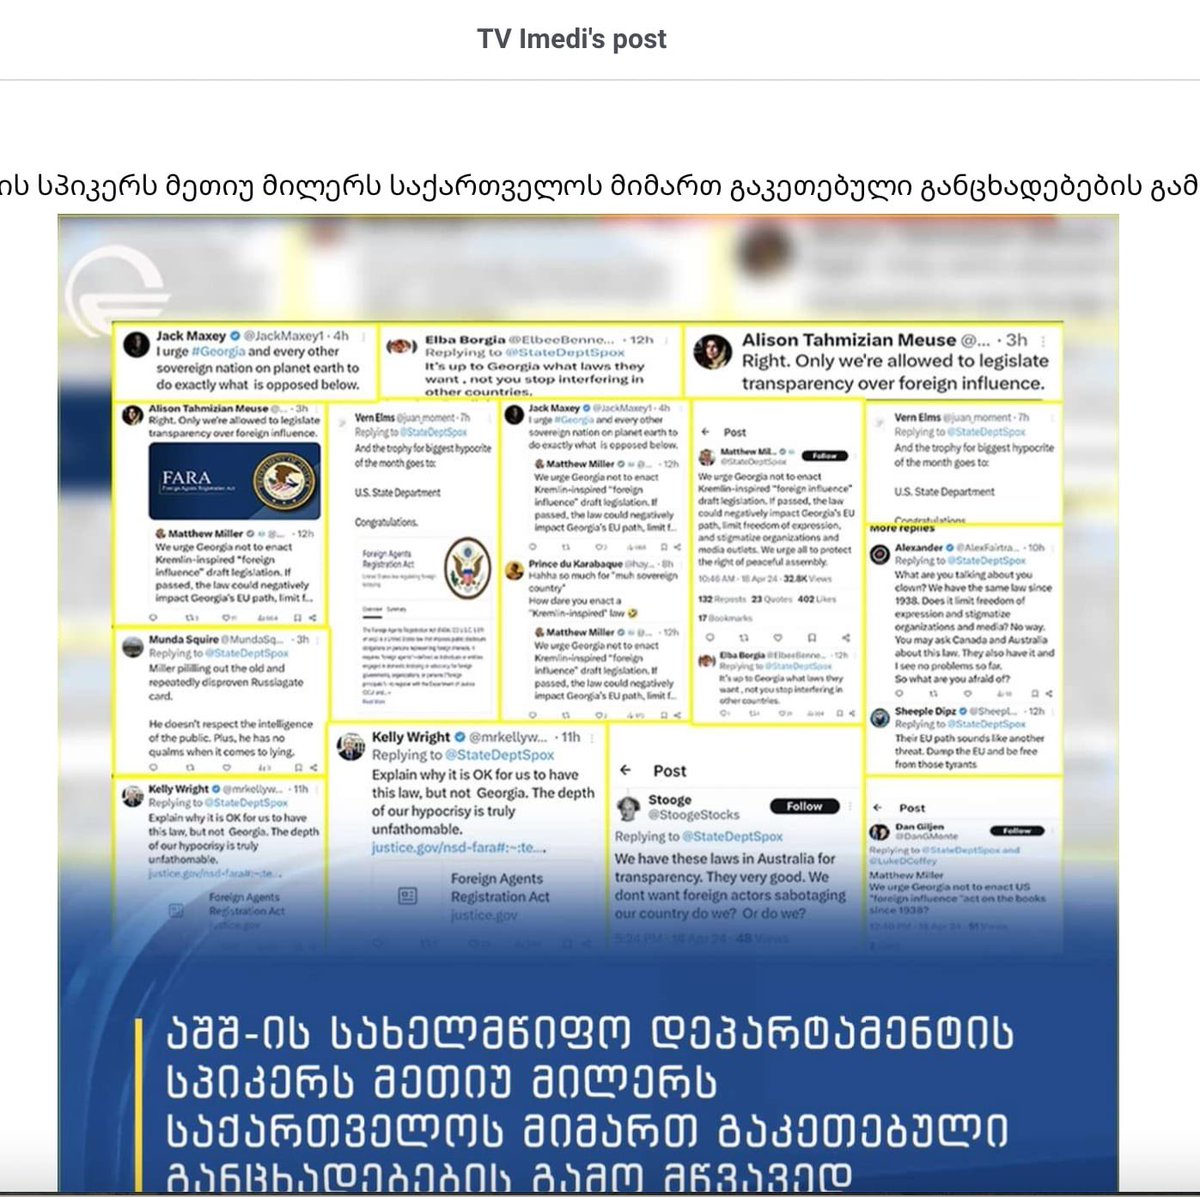 After the US State Dept criticism of Russian-style law in #Georgia, Pro-Govt TV IMEDI quoted foreign users of X criticizing Matthew Miller's remarks. Profile of one; others share similar sentiments .
#NoToRussianLaw #Russianpropaganda